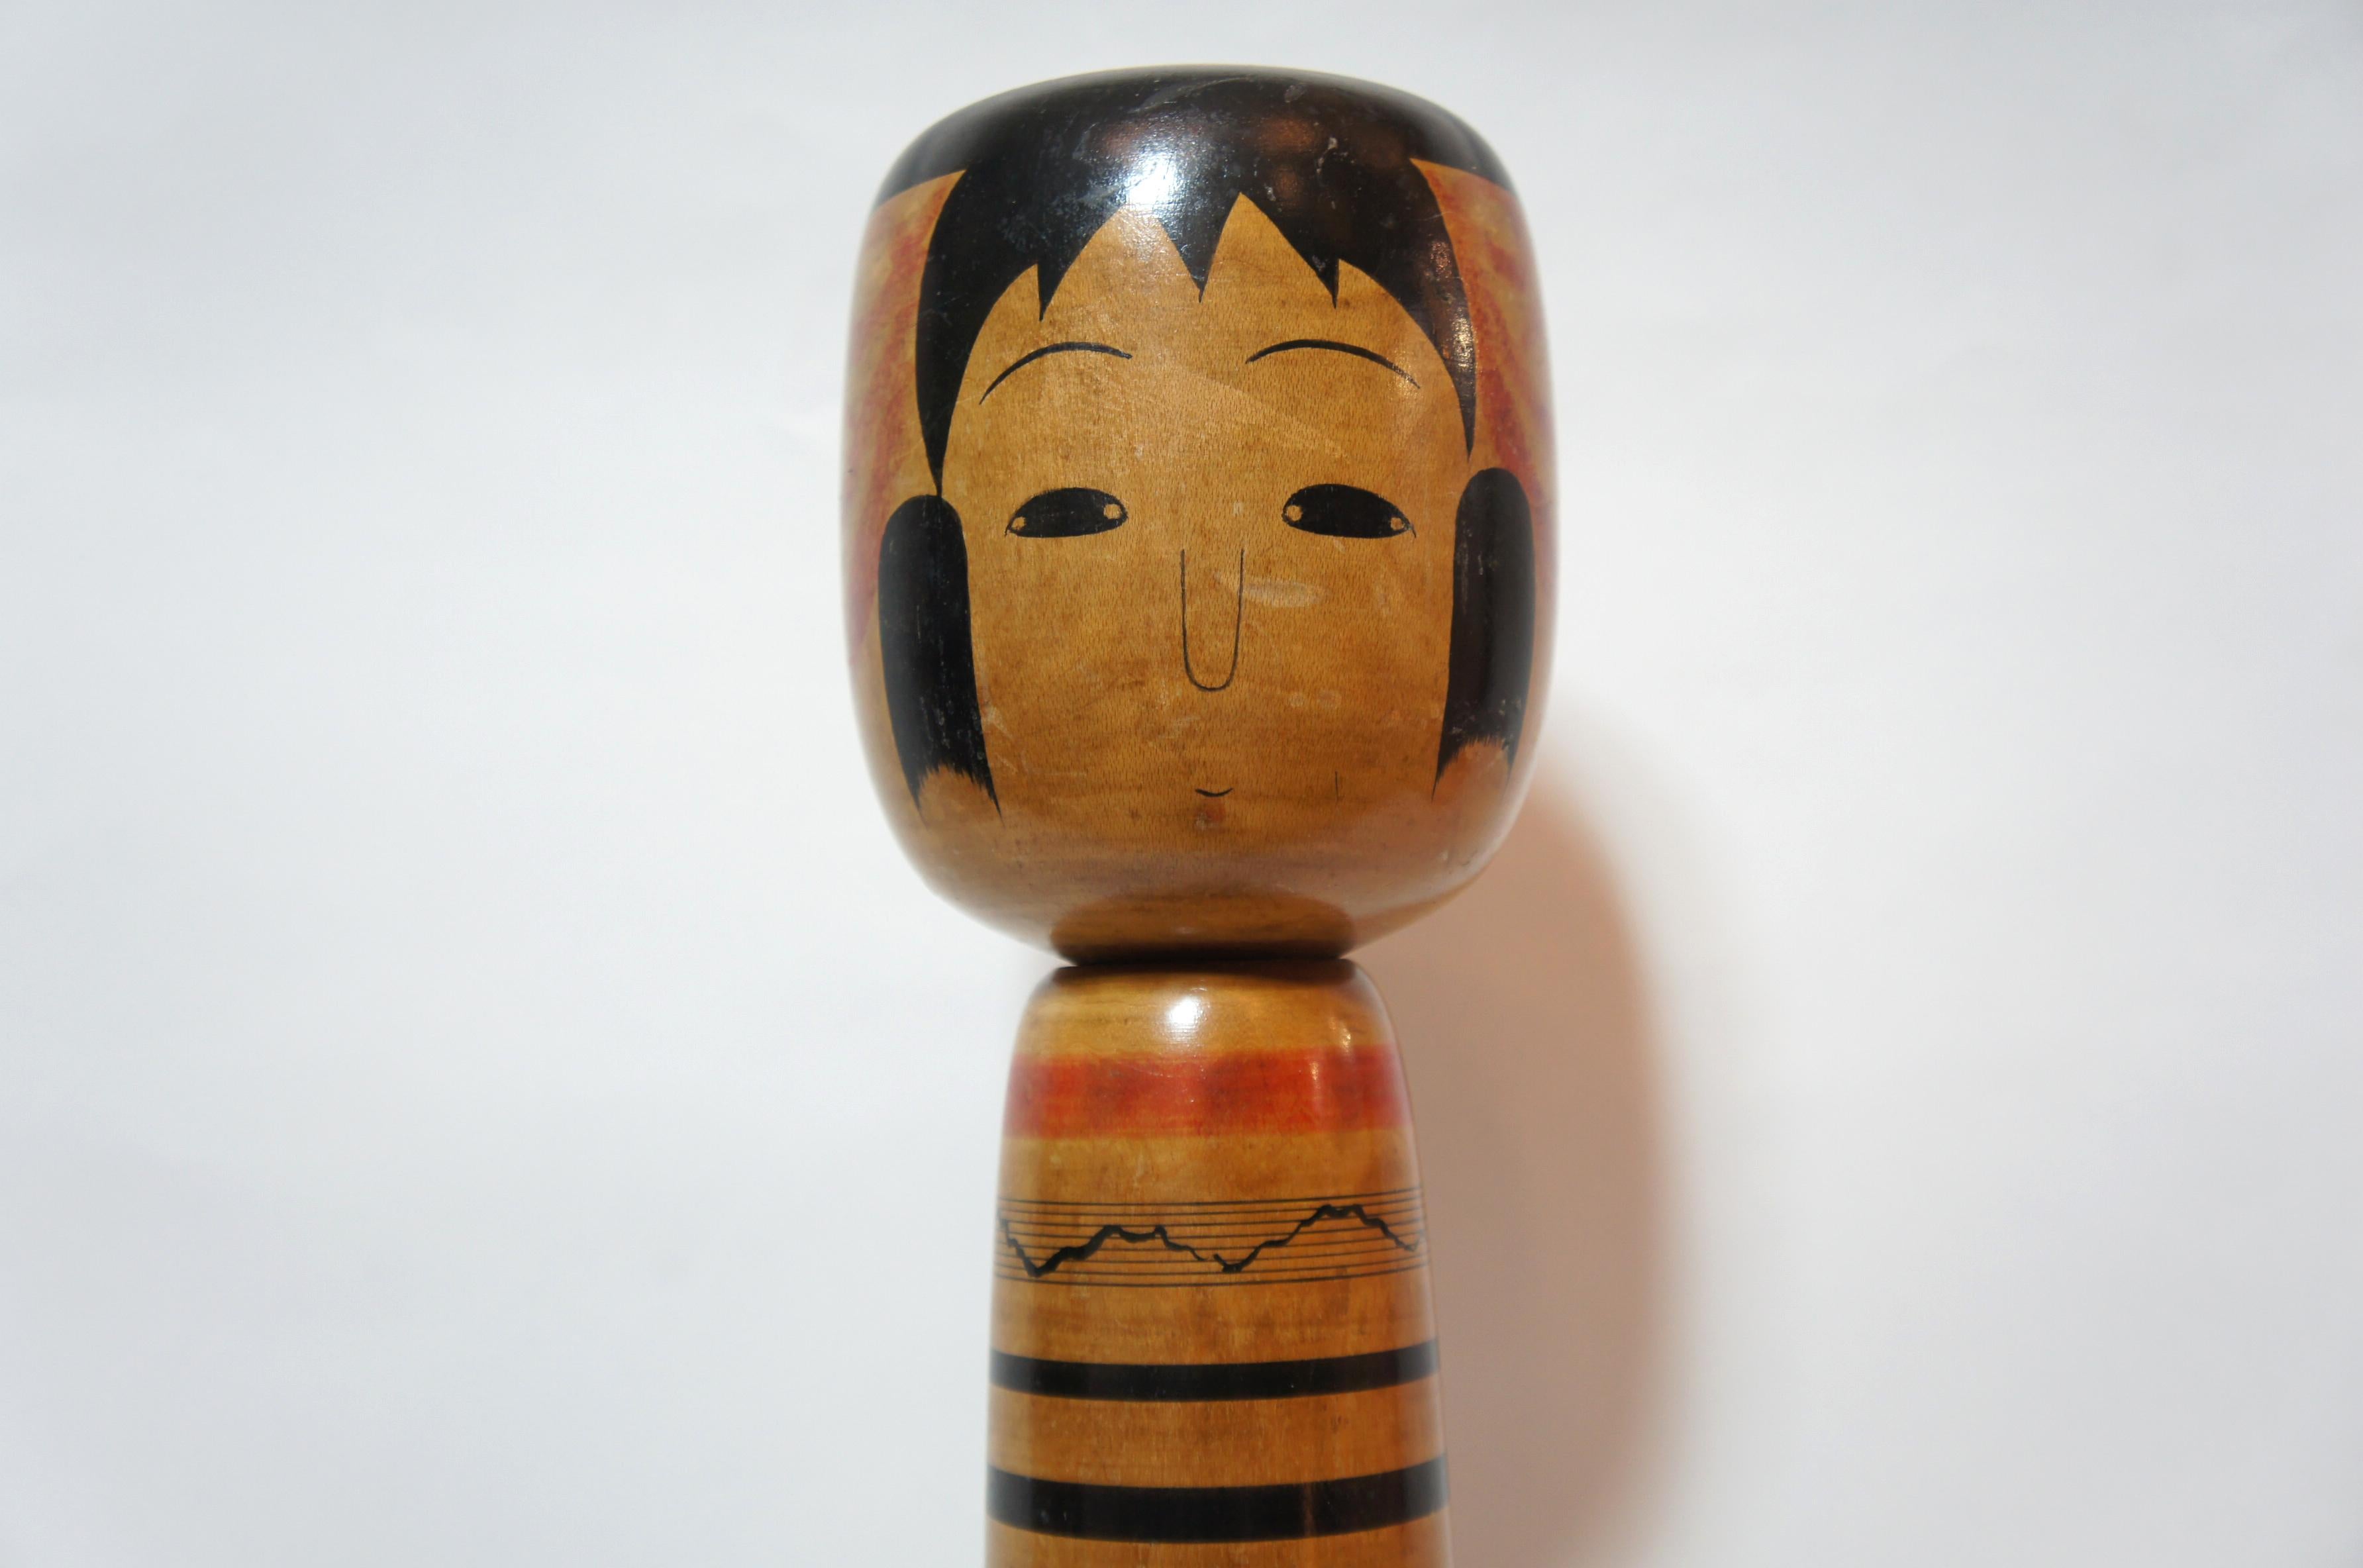 Japanese traditional kokeshi doll signde by Abe Hiroshi (1898-1984).
He is on of the kokeshi artists from Tsuchiyu-onsen, Fukushima, Japan.

The style of this Kokeshi called Tsuchiyu style is on of 11 types of Kokeshi and is one of three most